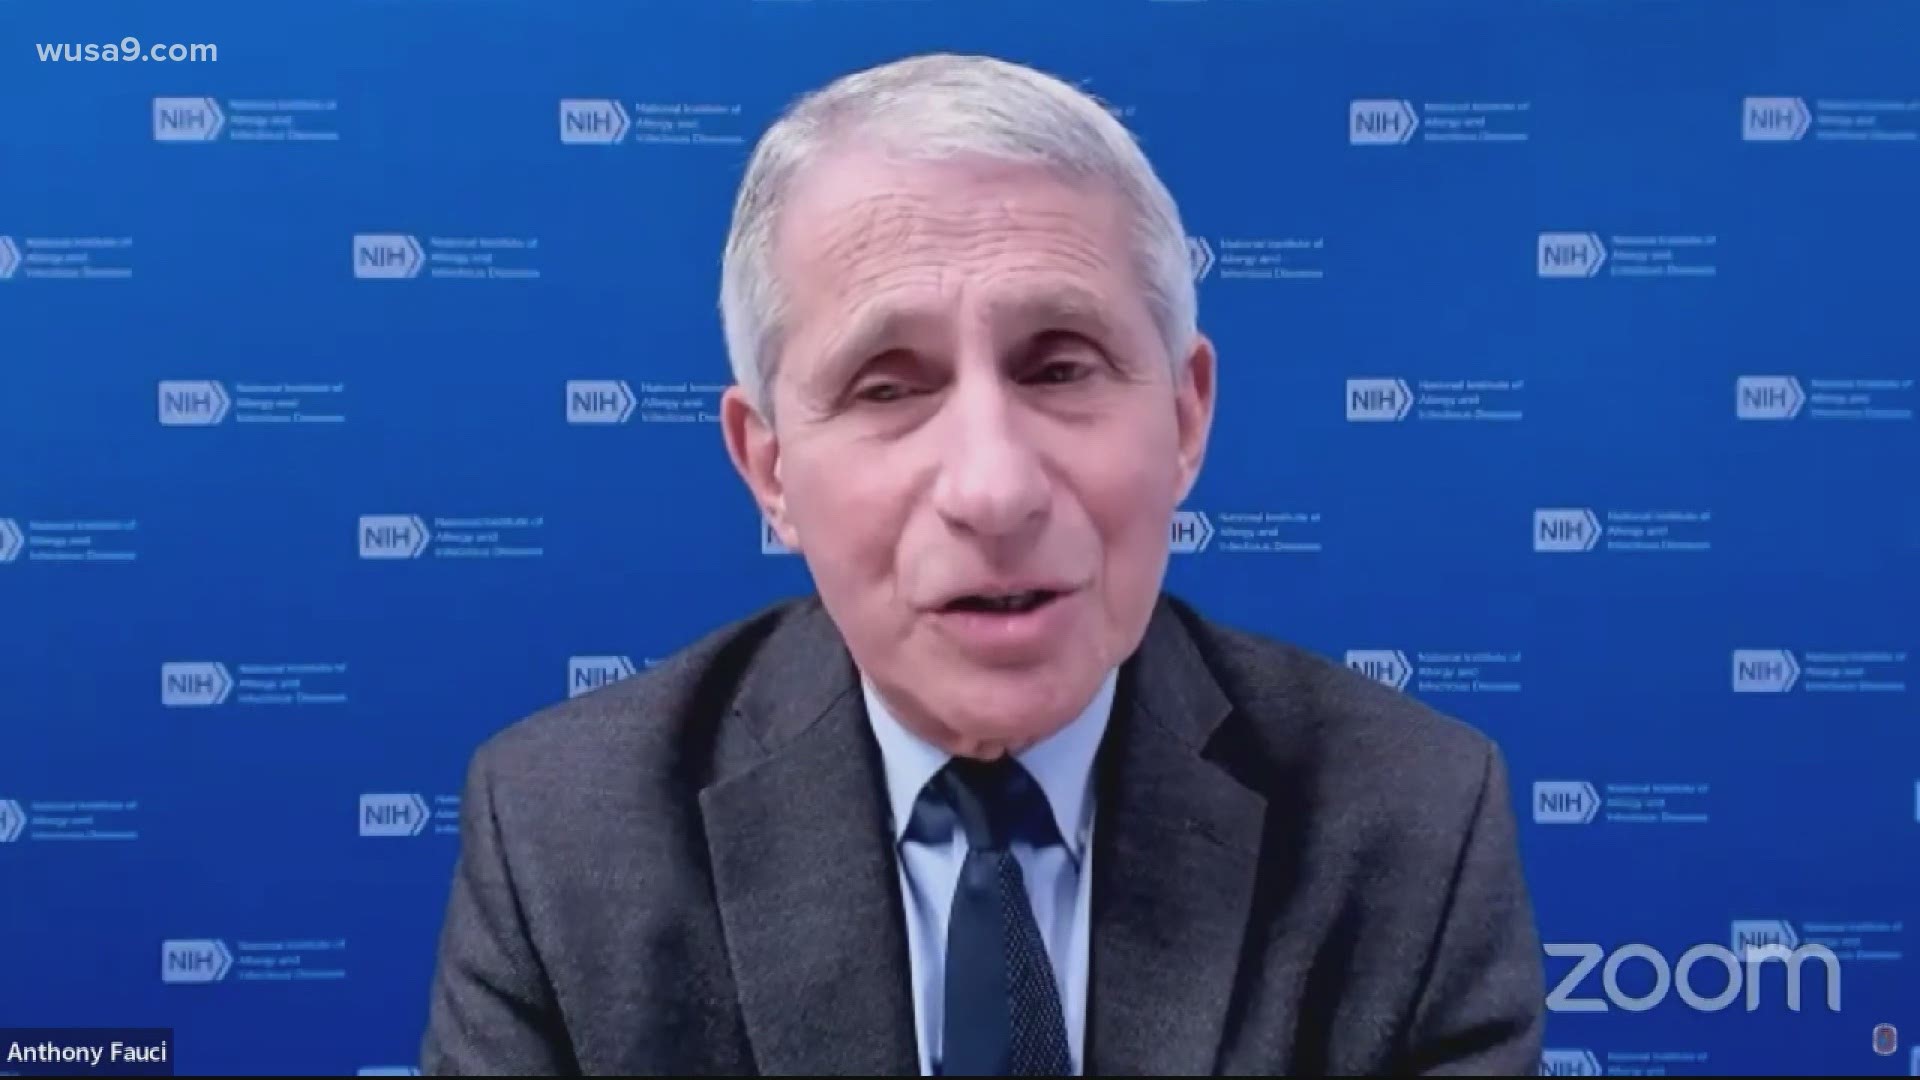 Fauci is concerned that Black and Latino communities are reluctant to recieve COVID19 vaccines at the same time they are being more heavily impacted by illness.